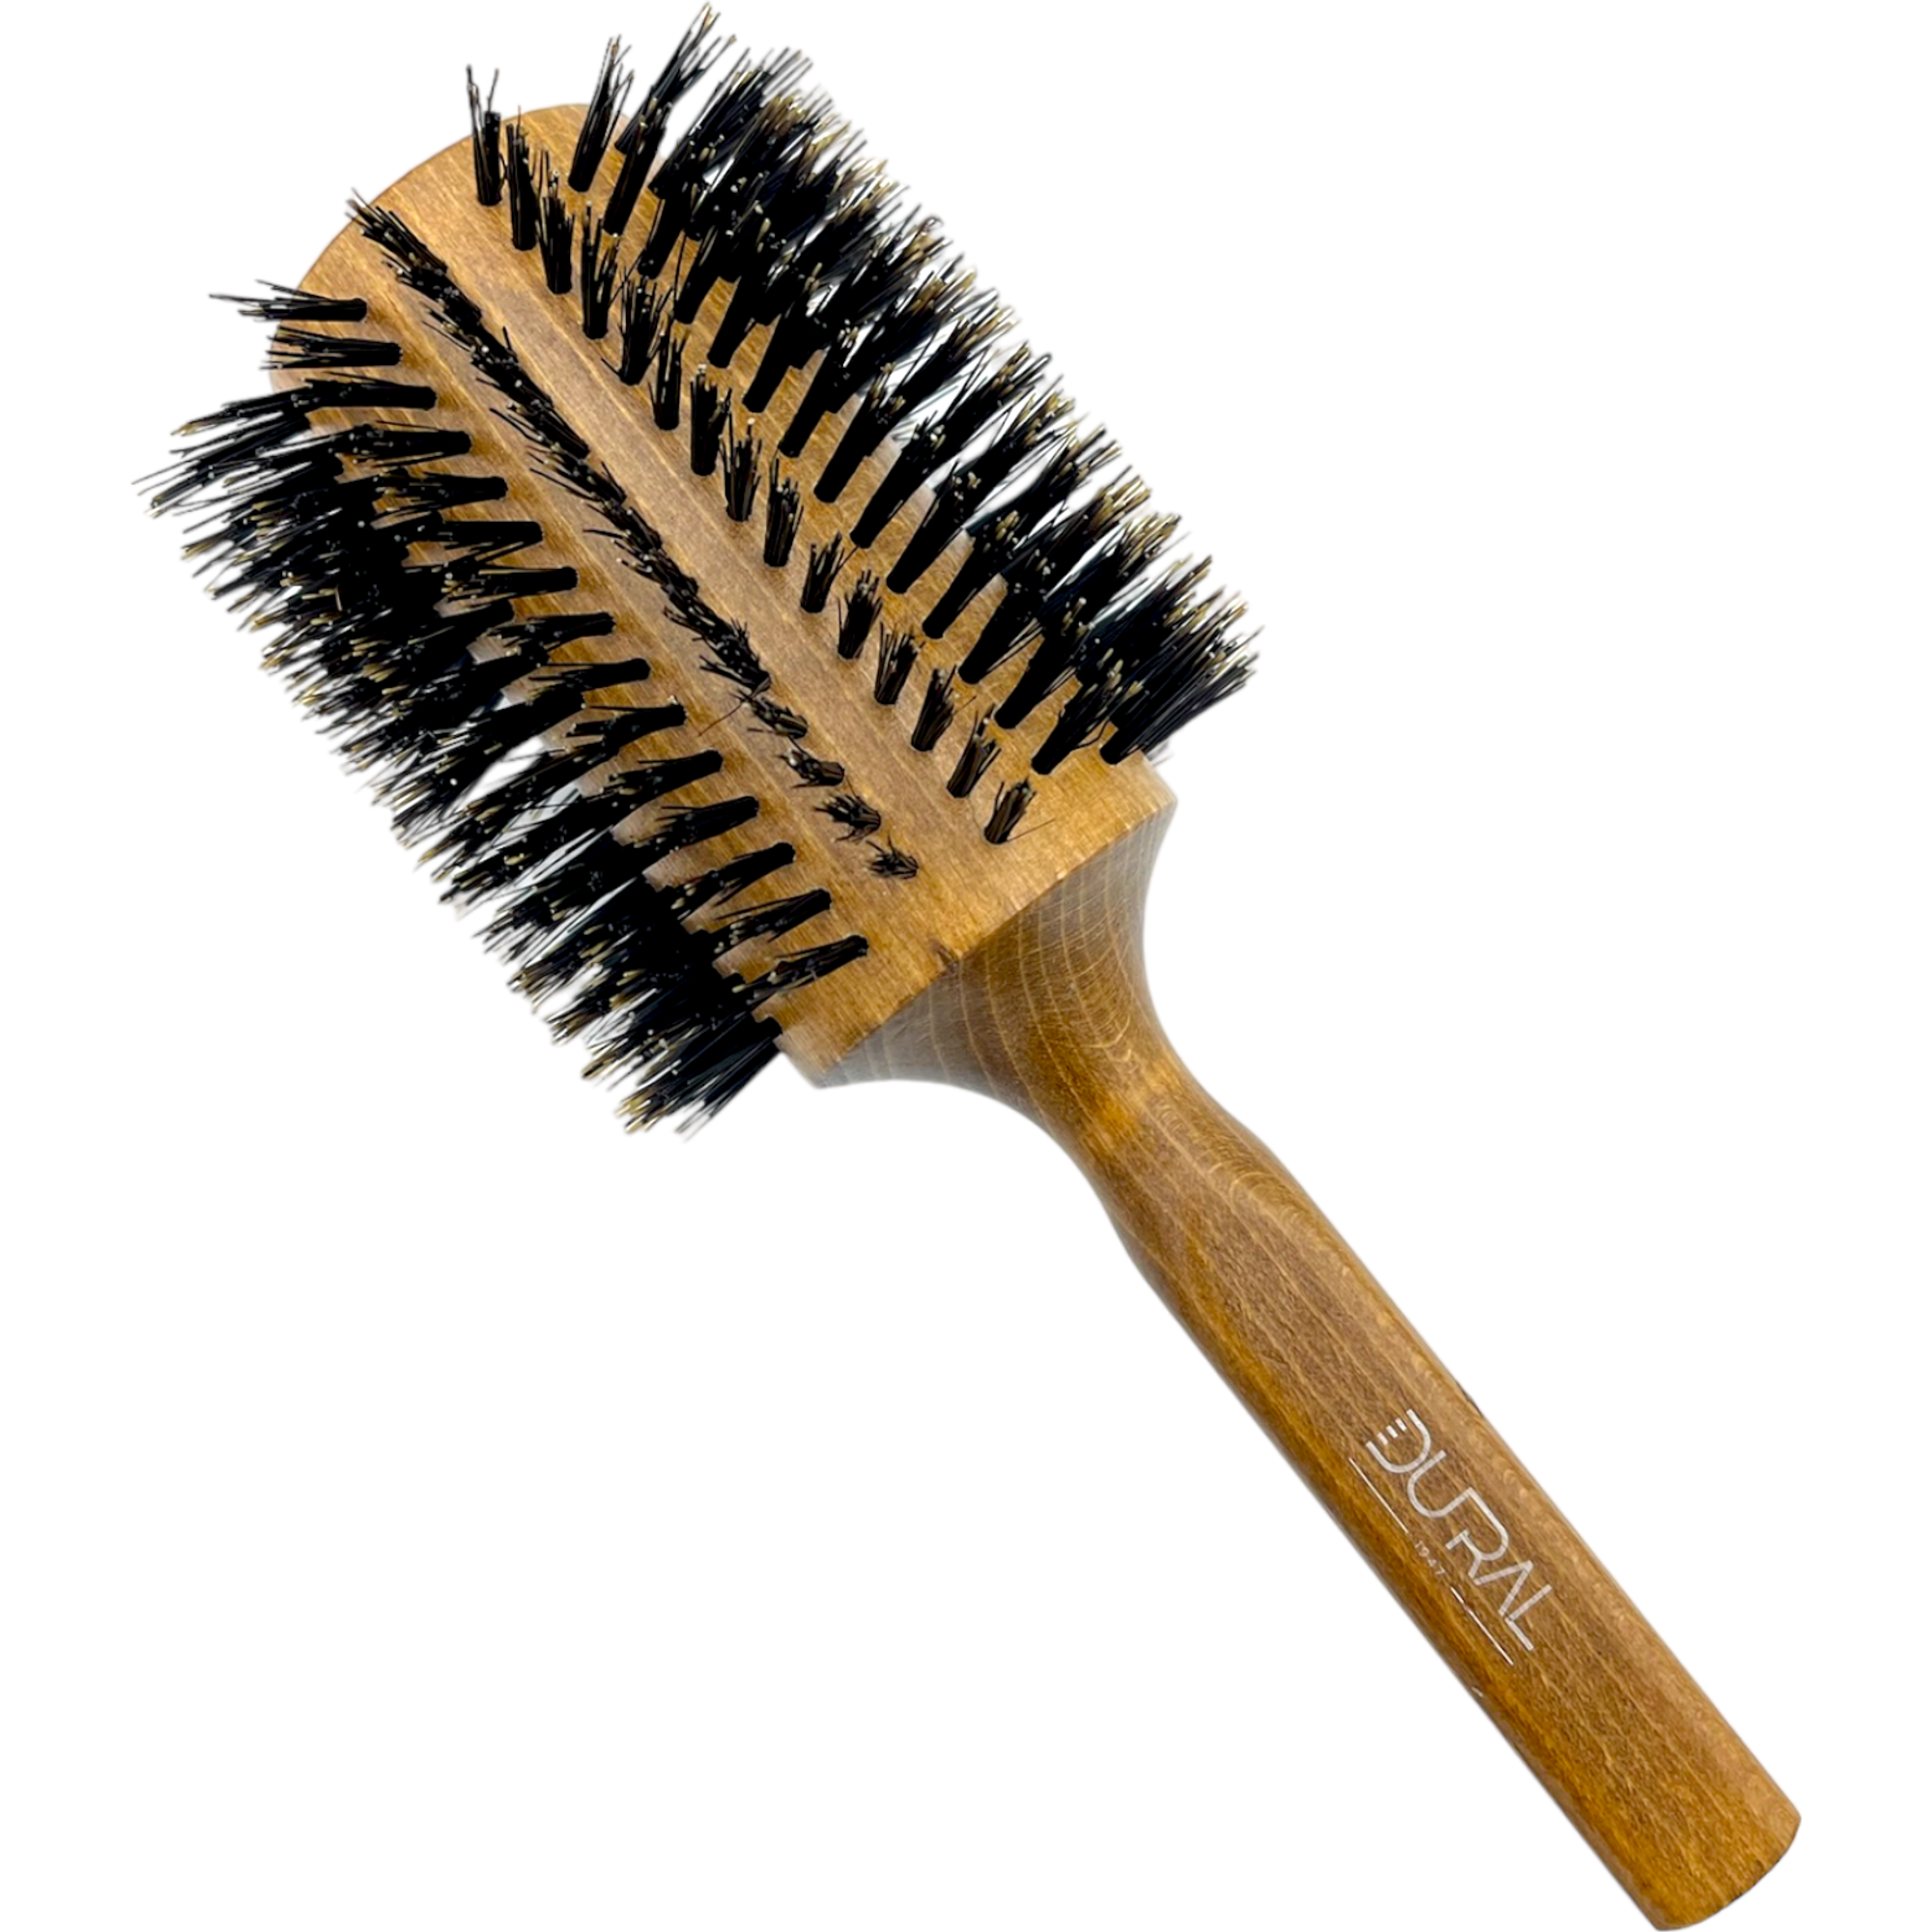 Dural Beech wood Round-Styler hair brush with boral bristles - 18 rows